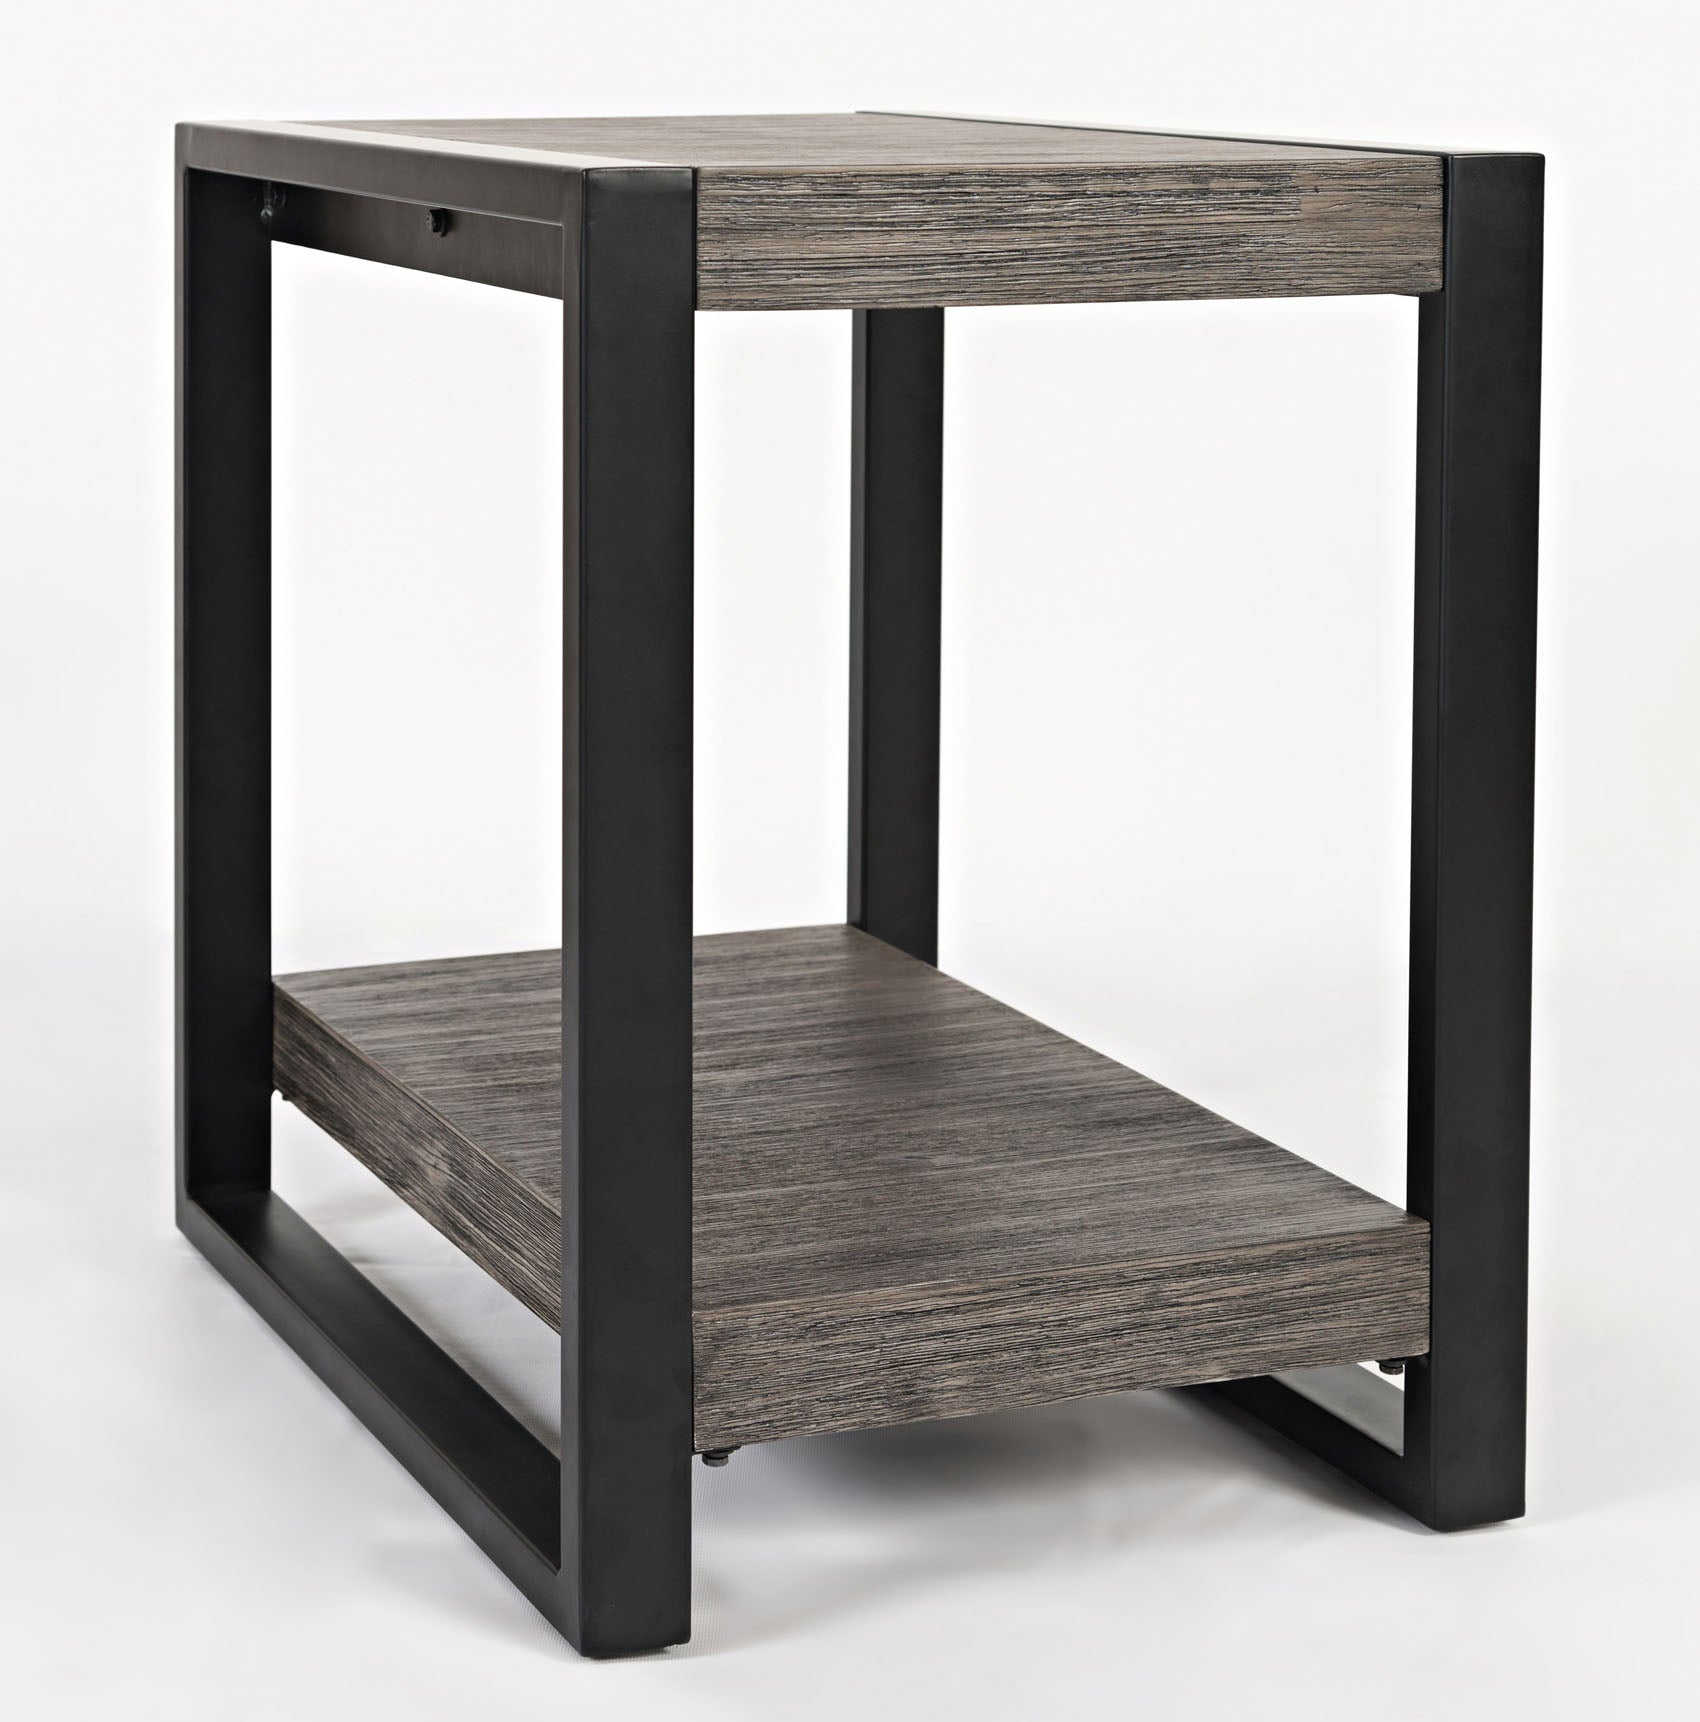 Silas Chairside End Table - MJM Furniture